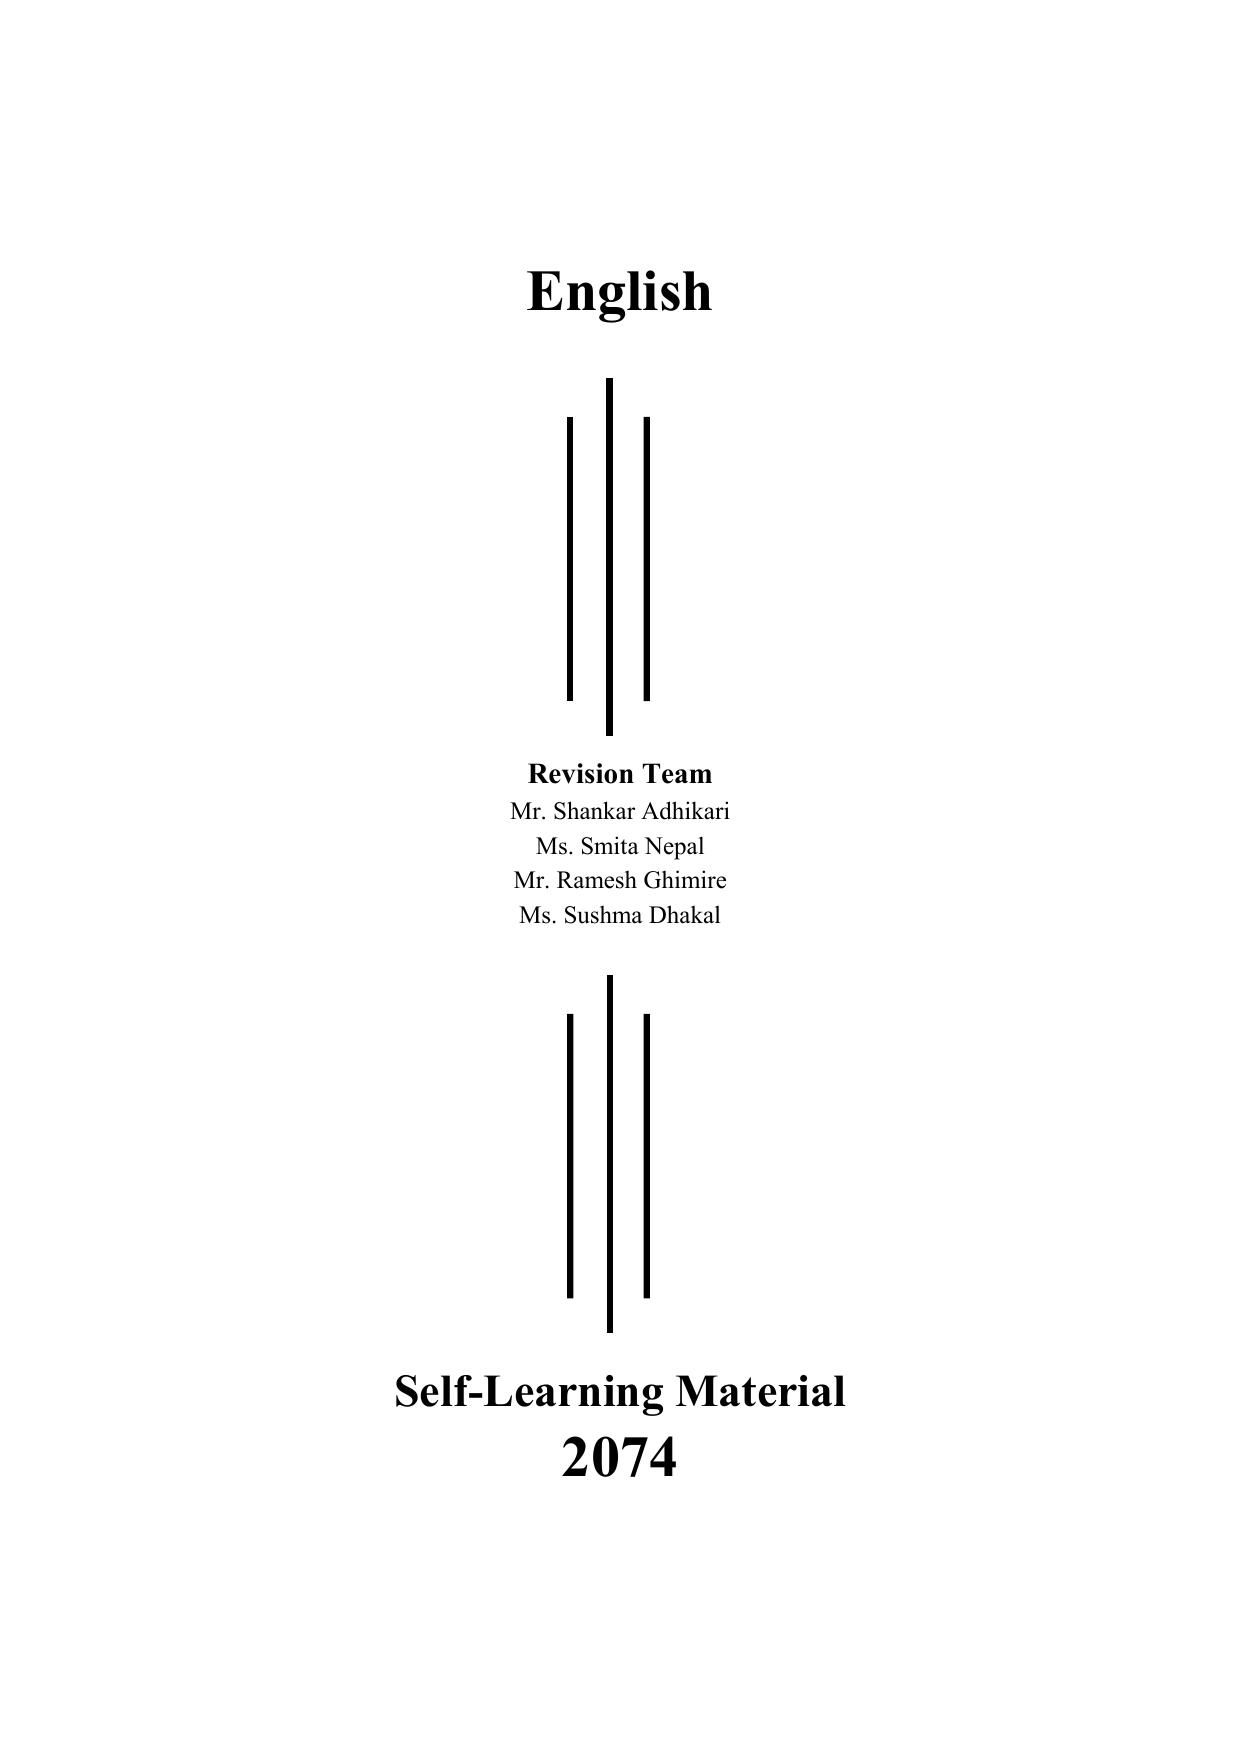 English: Self Learning Material